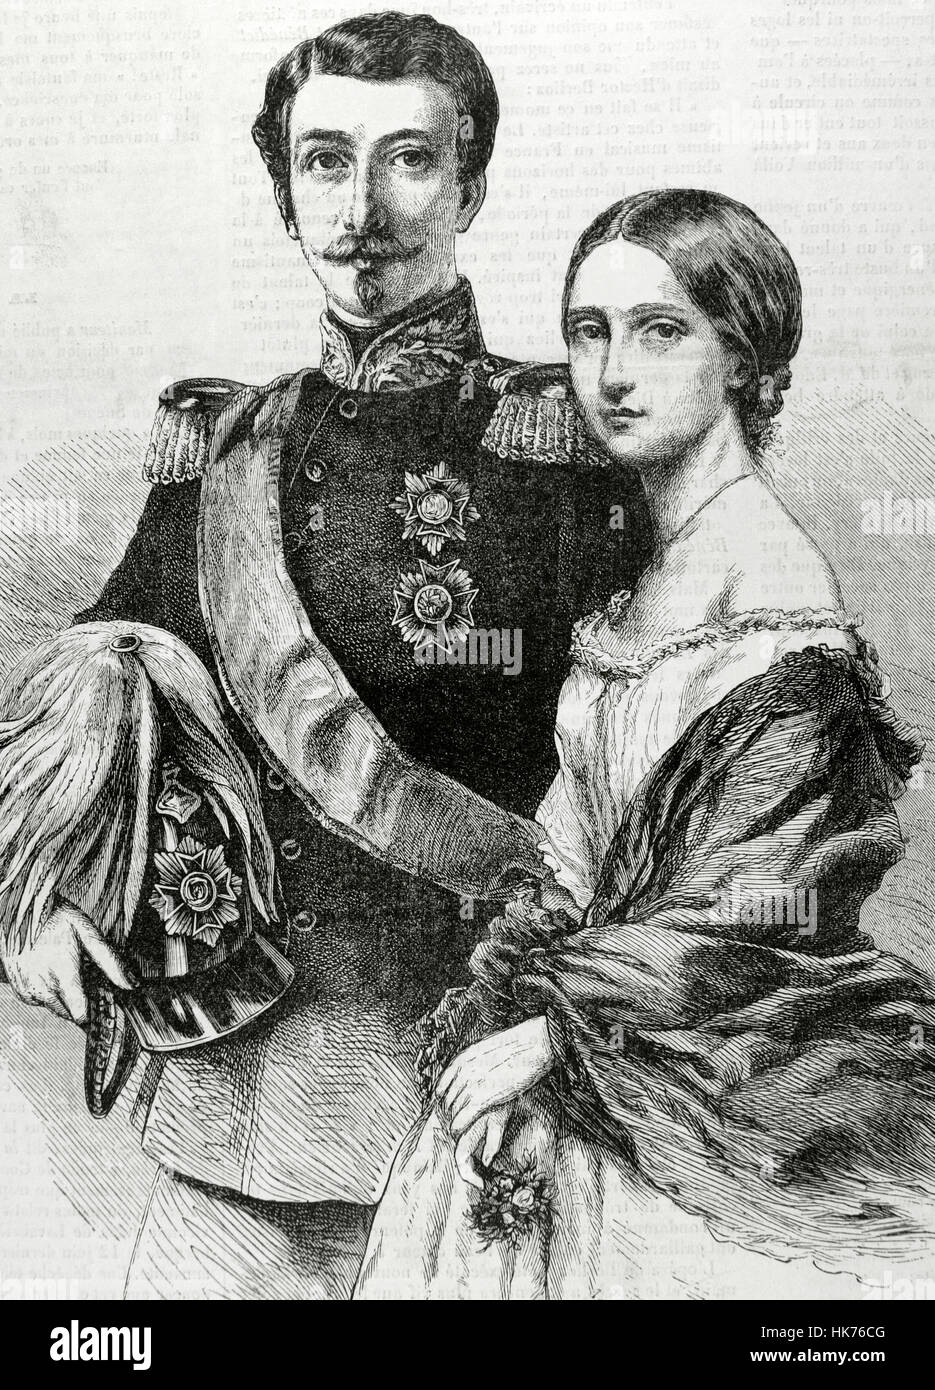 Frederick I (1826-1907). Grand Duke of Baden with his wife Princess Louise of Prussia (1838-1923). Engraving. The Illustrated Universe (Univers Illustre), 1862. Stock Photo